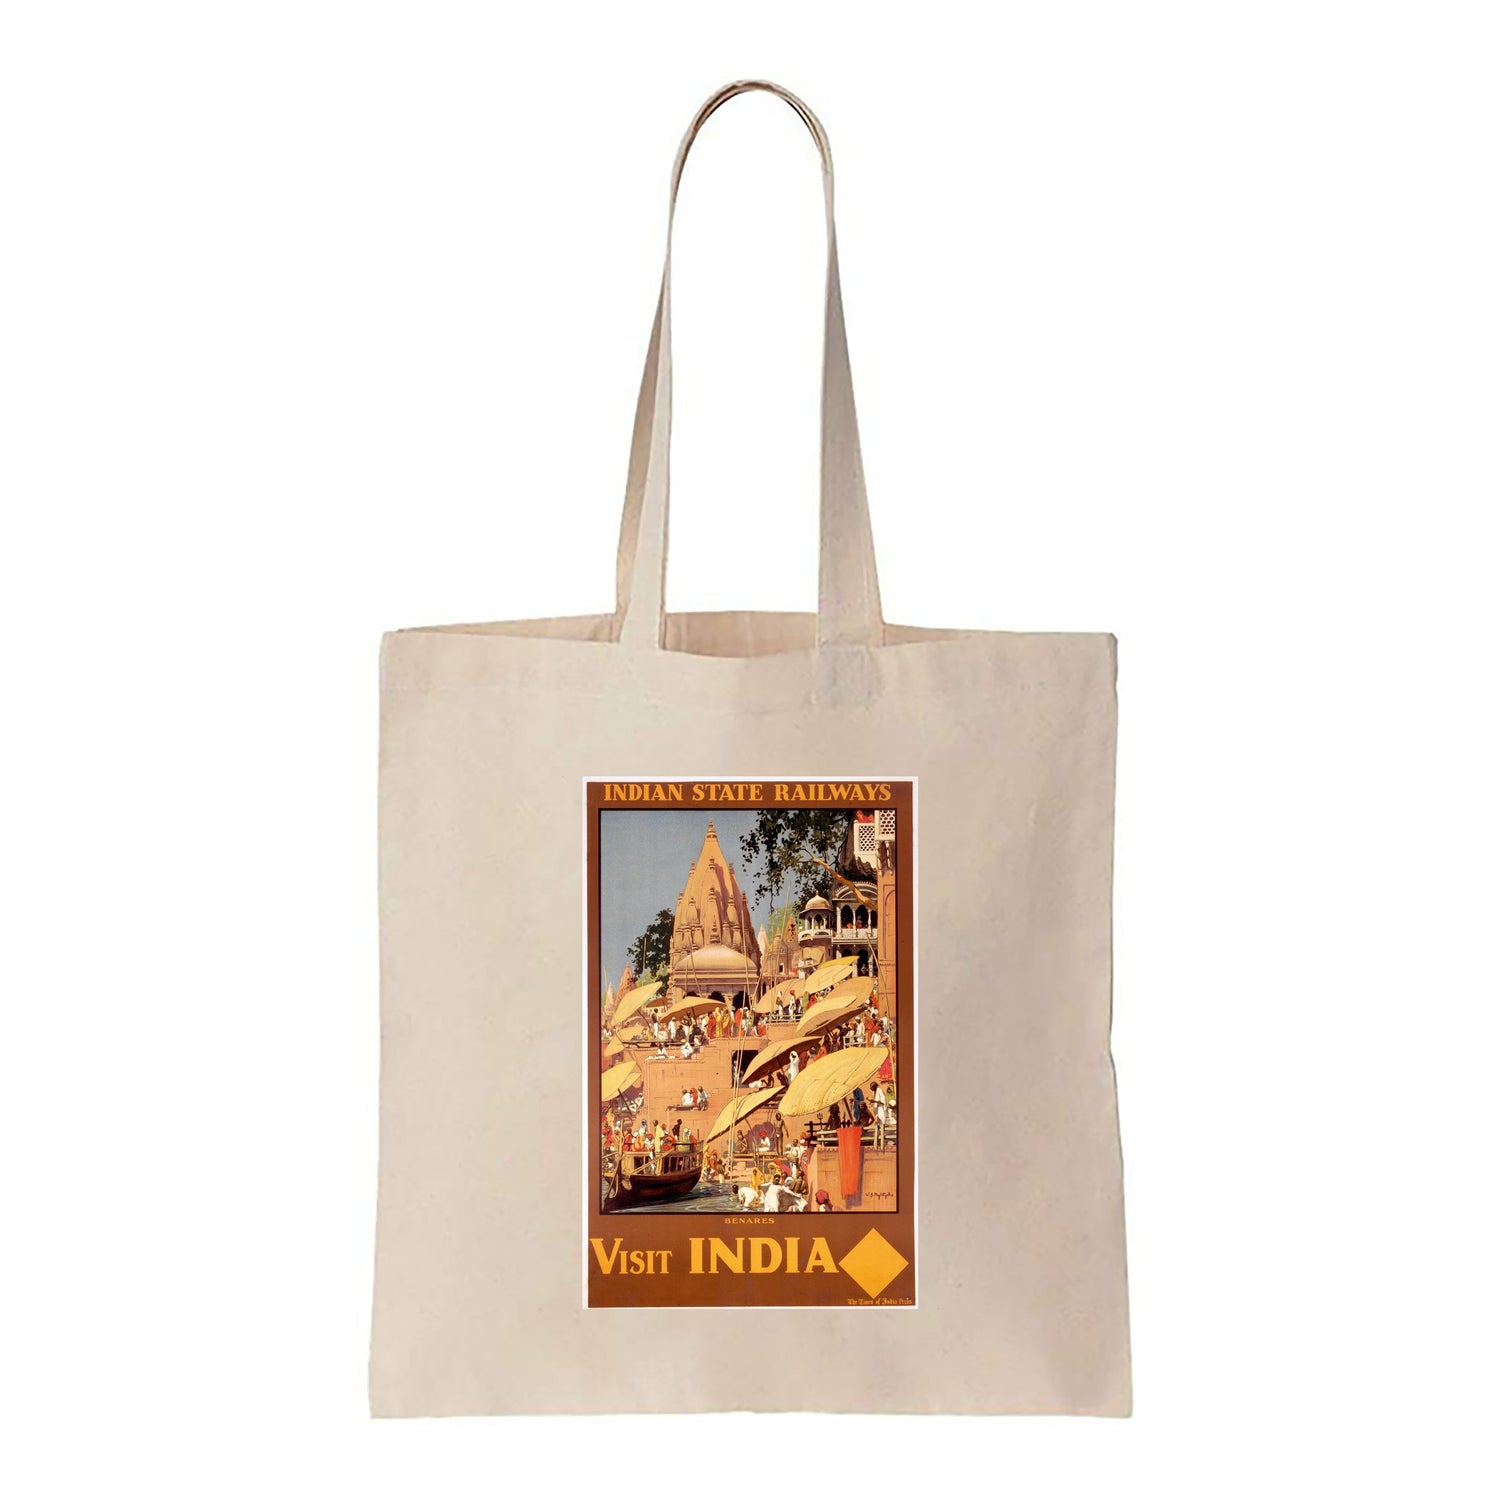 Visit India, Indian State Railways - Canvas Tote Bag